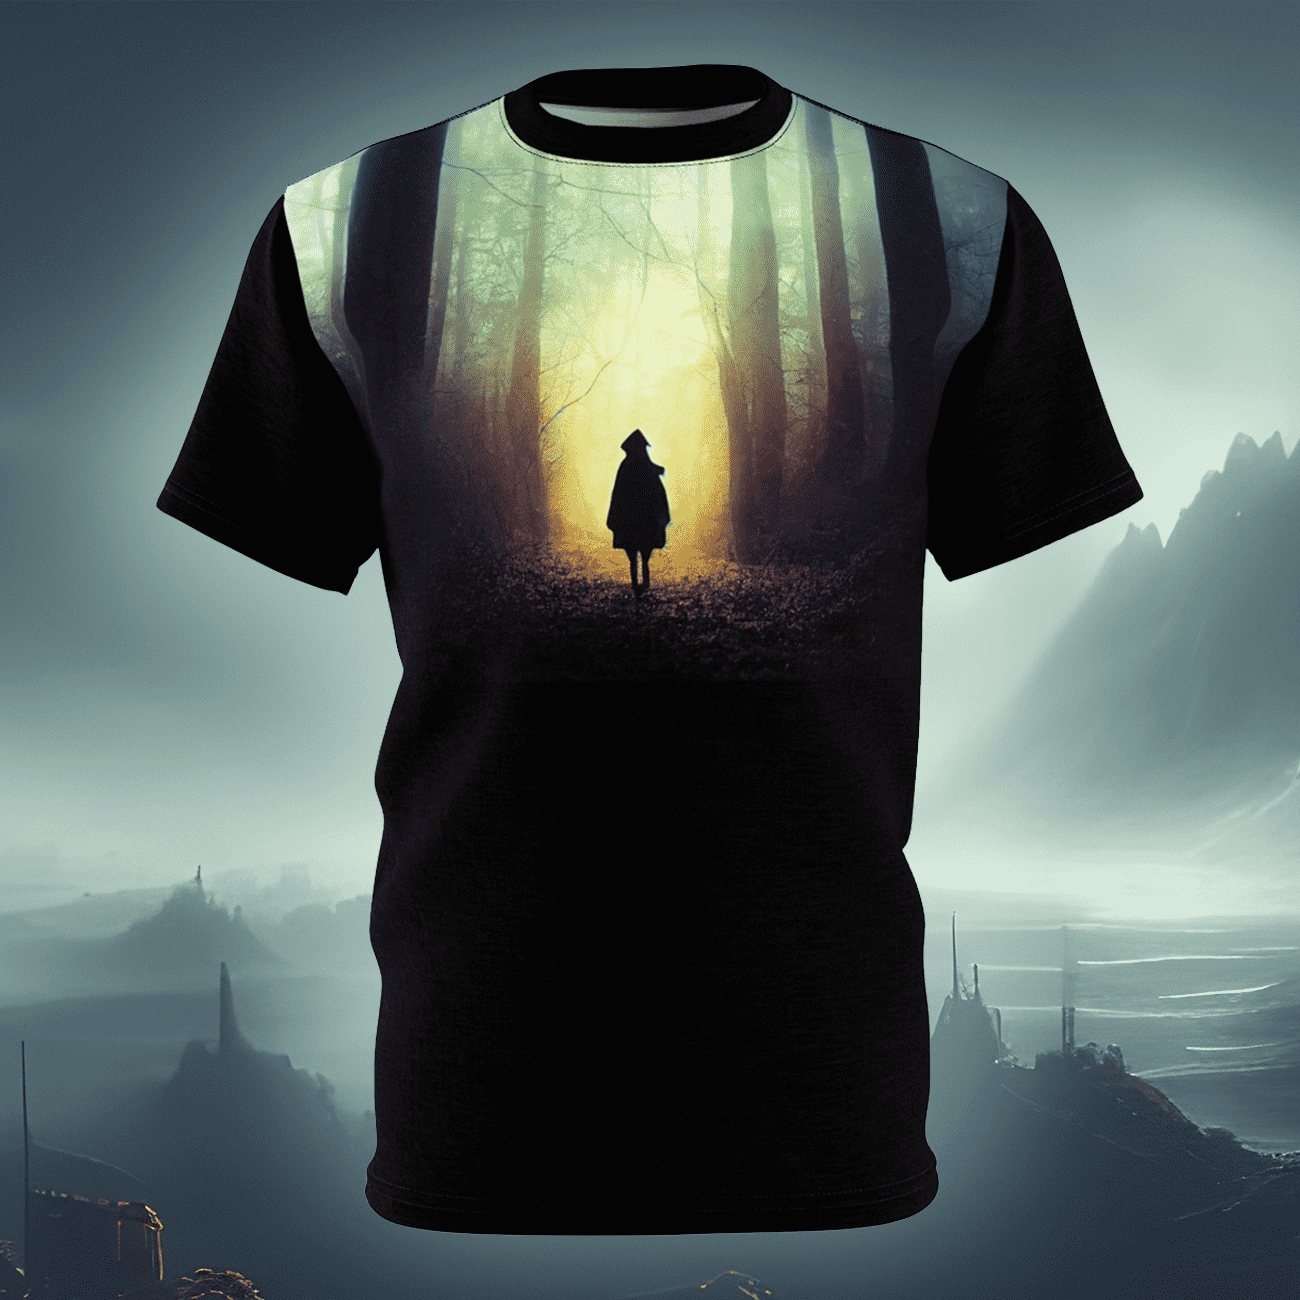 Gothic horror art t-shirt of a spooky, mysterious girl  lost in a forest. Inspired by fairytales. 